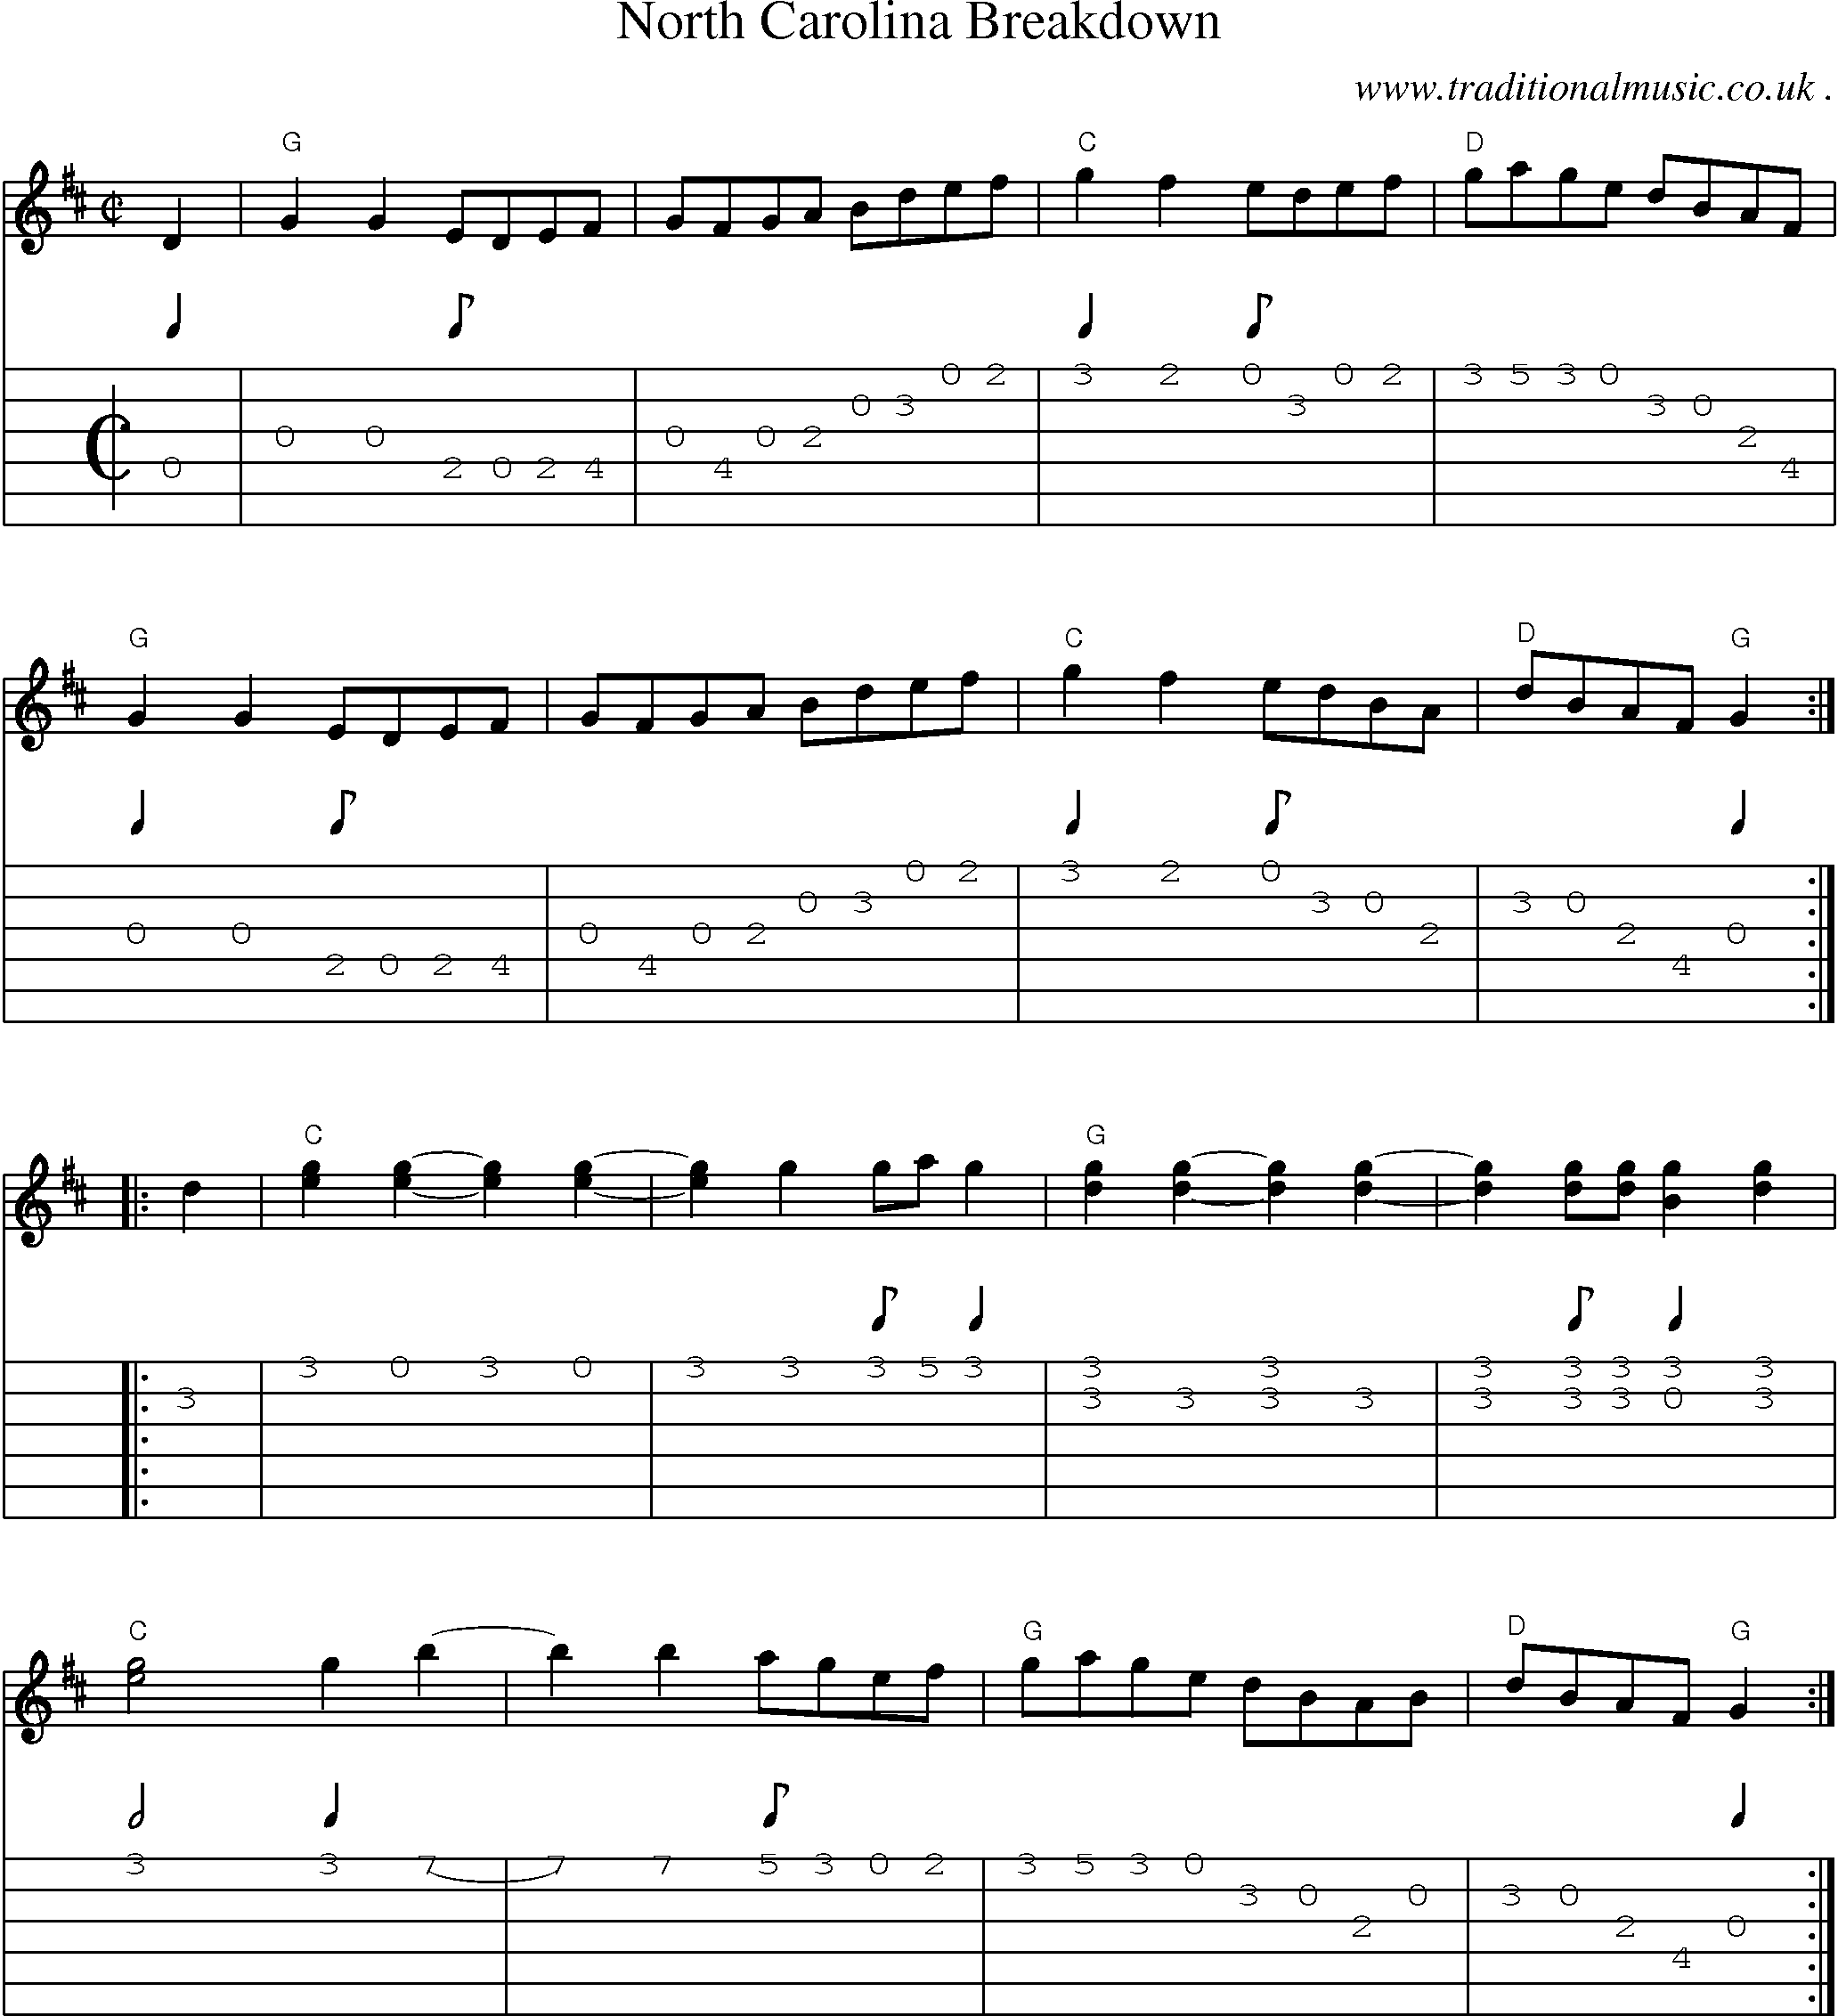 Music Score and Guitar Tabs for North Carolina Breakdown1